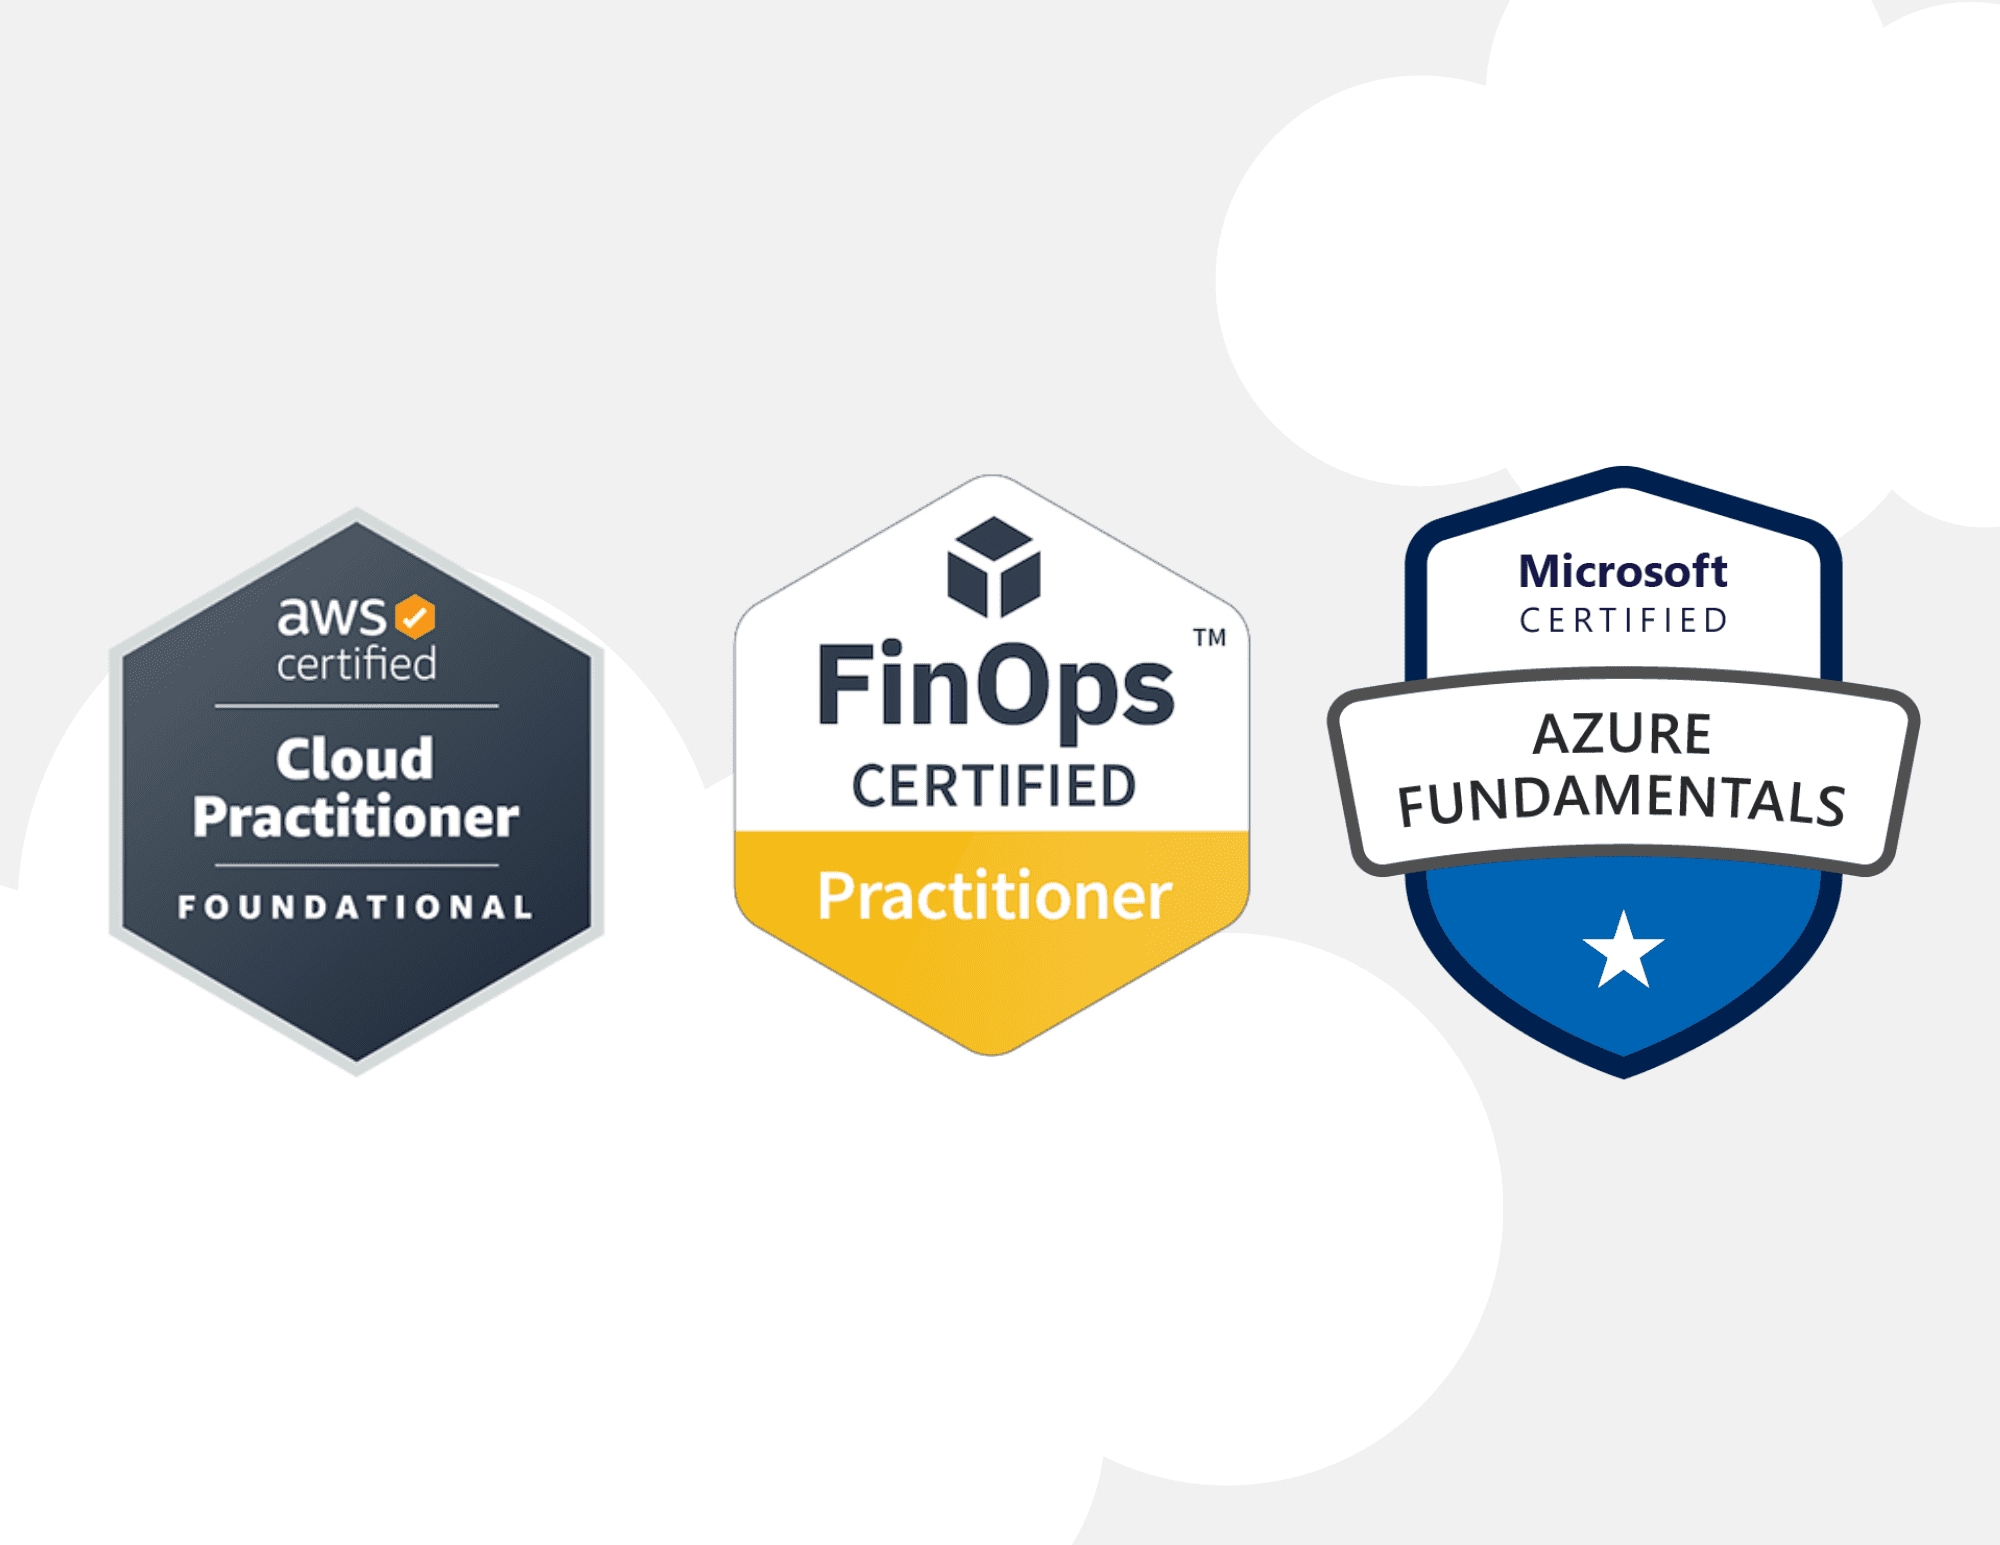 AWS, FinOps and Azure certified